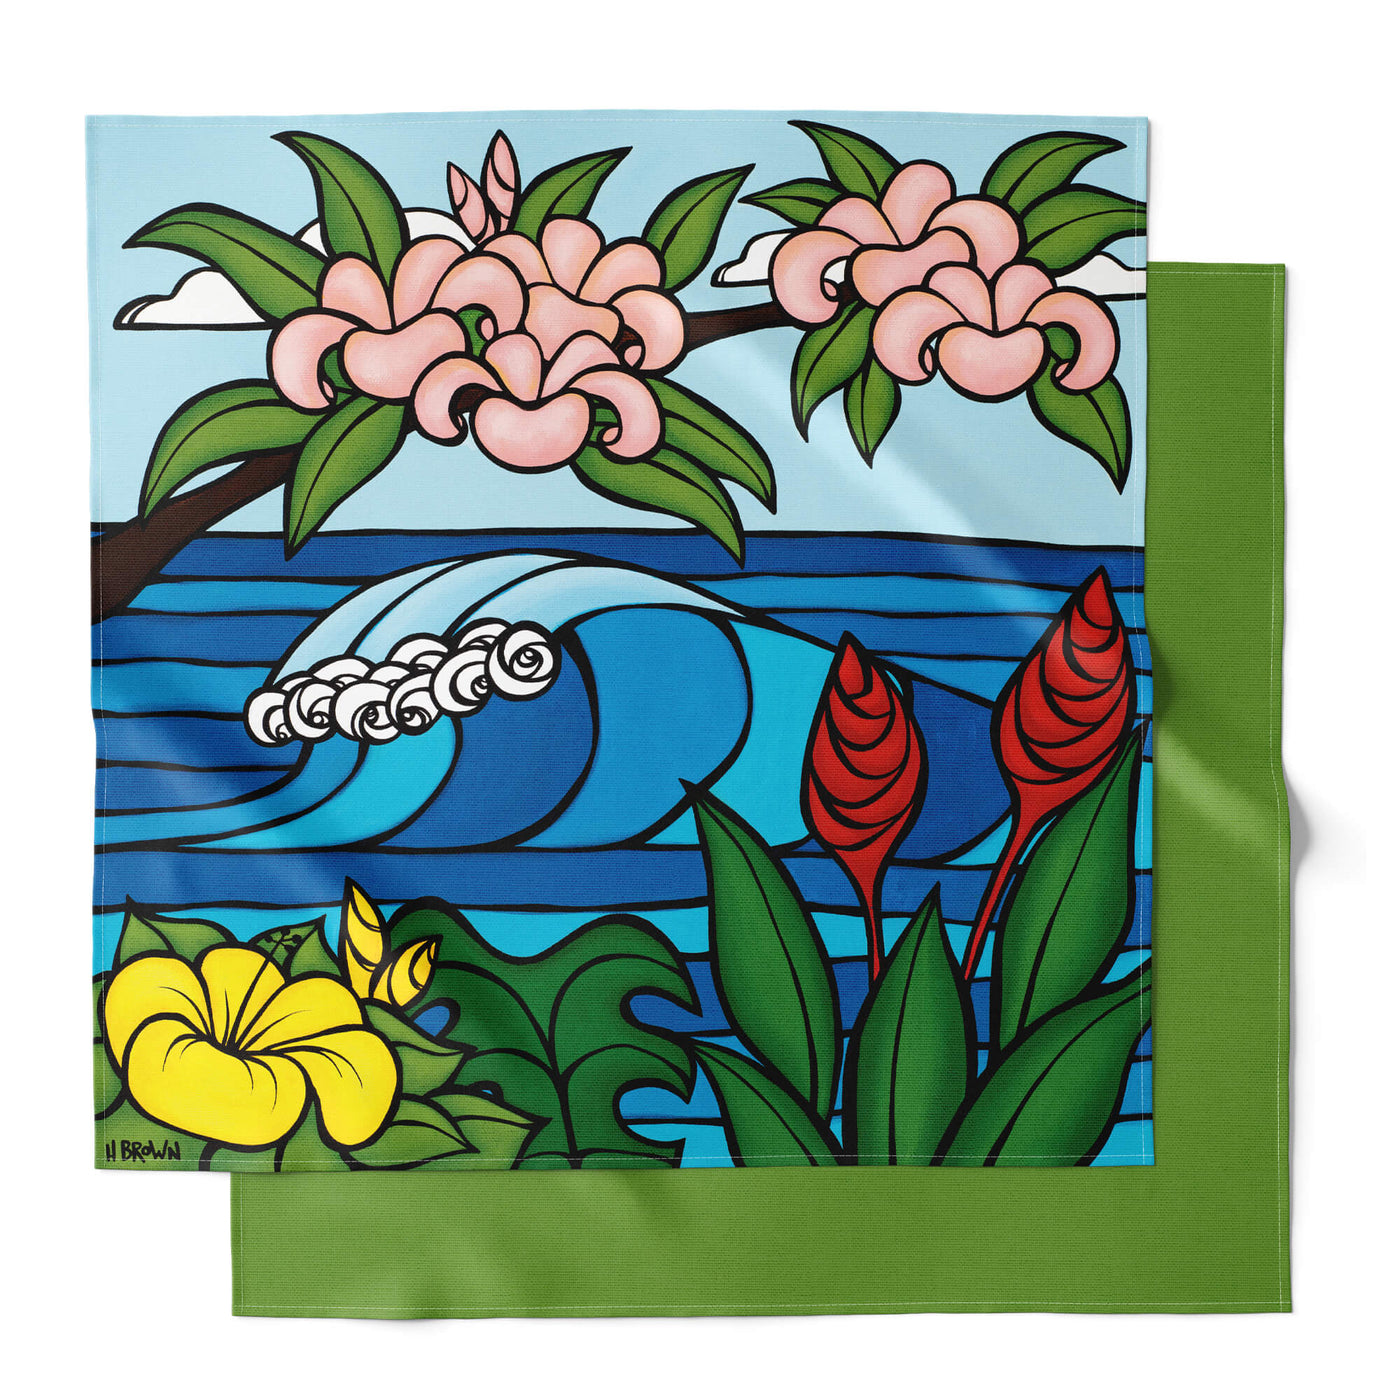 Furoshiki wrapping cloth featuring a seascape framed by colorful tropical flowers by Hawaii surf artist Heather Brown